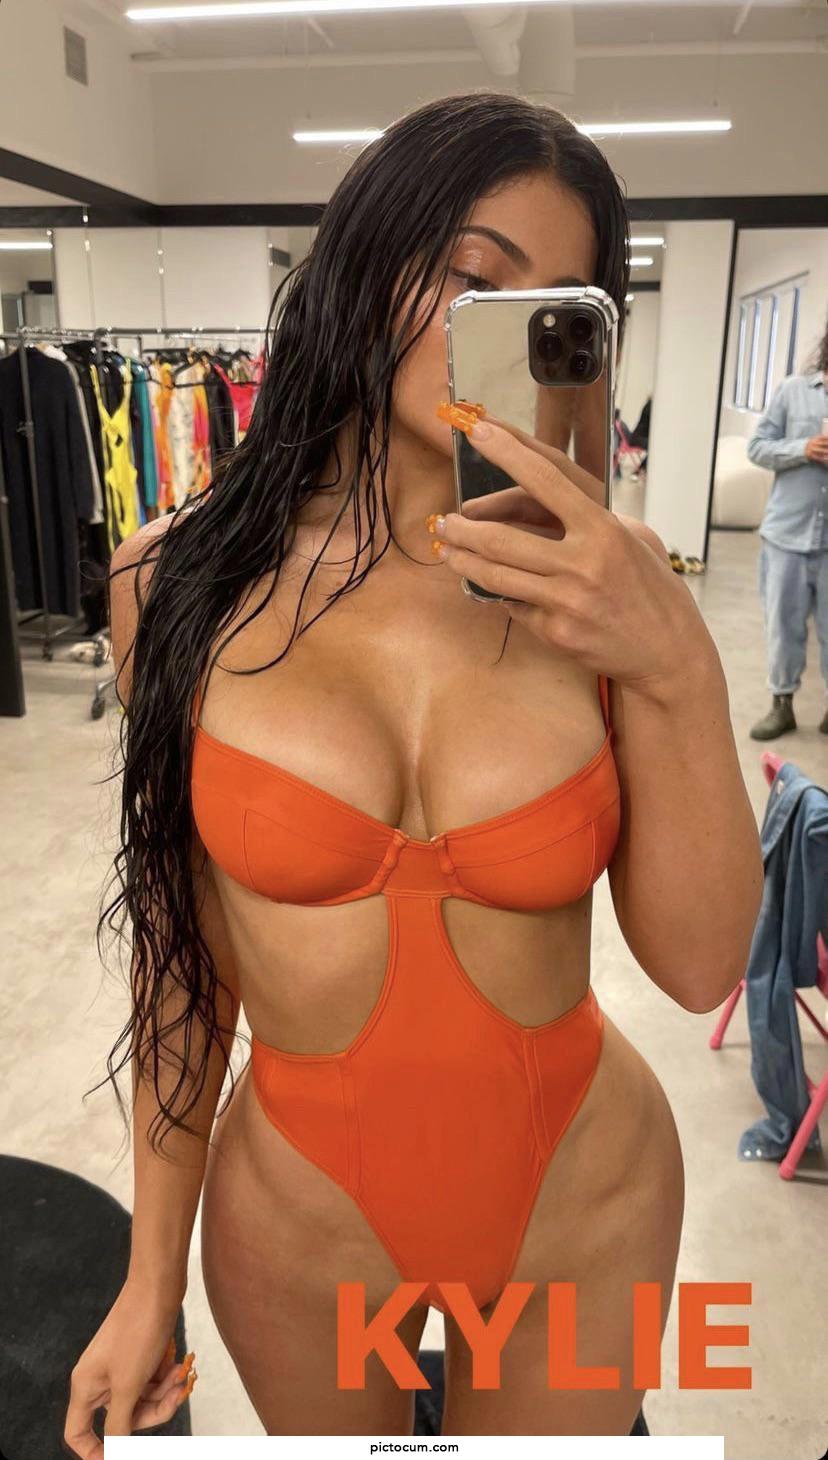 Holy Hell… Look at How Perfect Those Big Juicy Mommy Boobies Are😍😳😩She Makes my Dick Throb So Much.